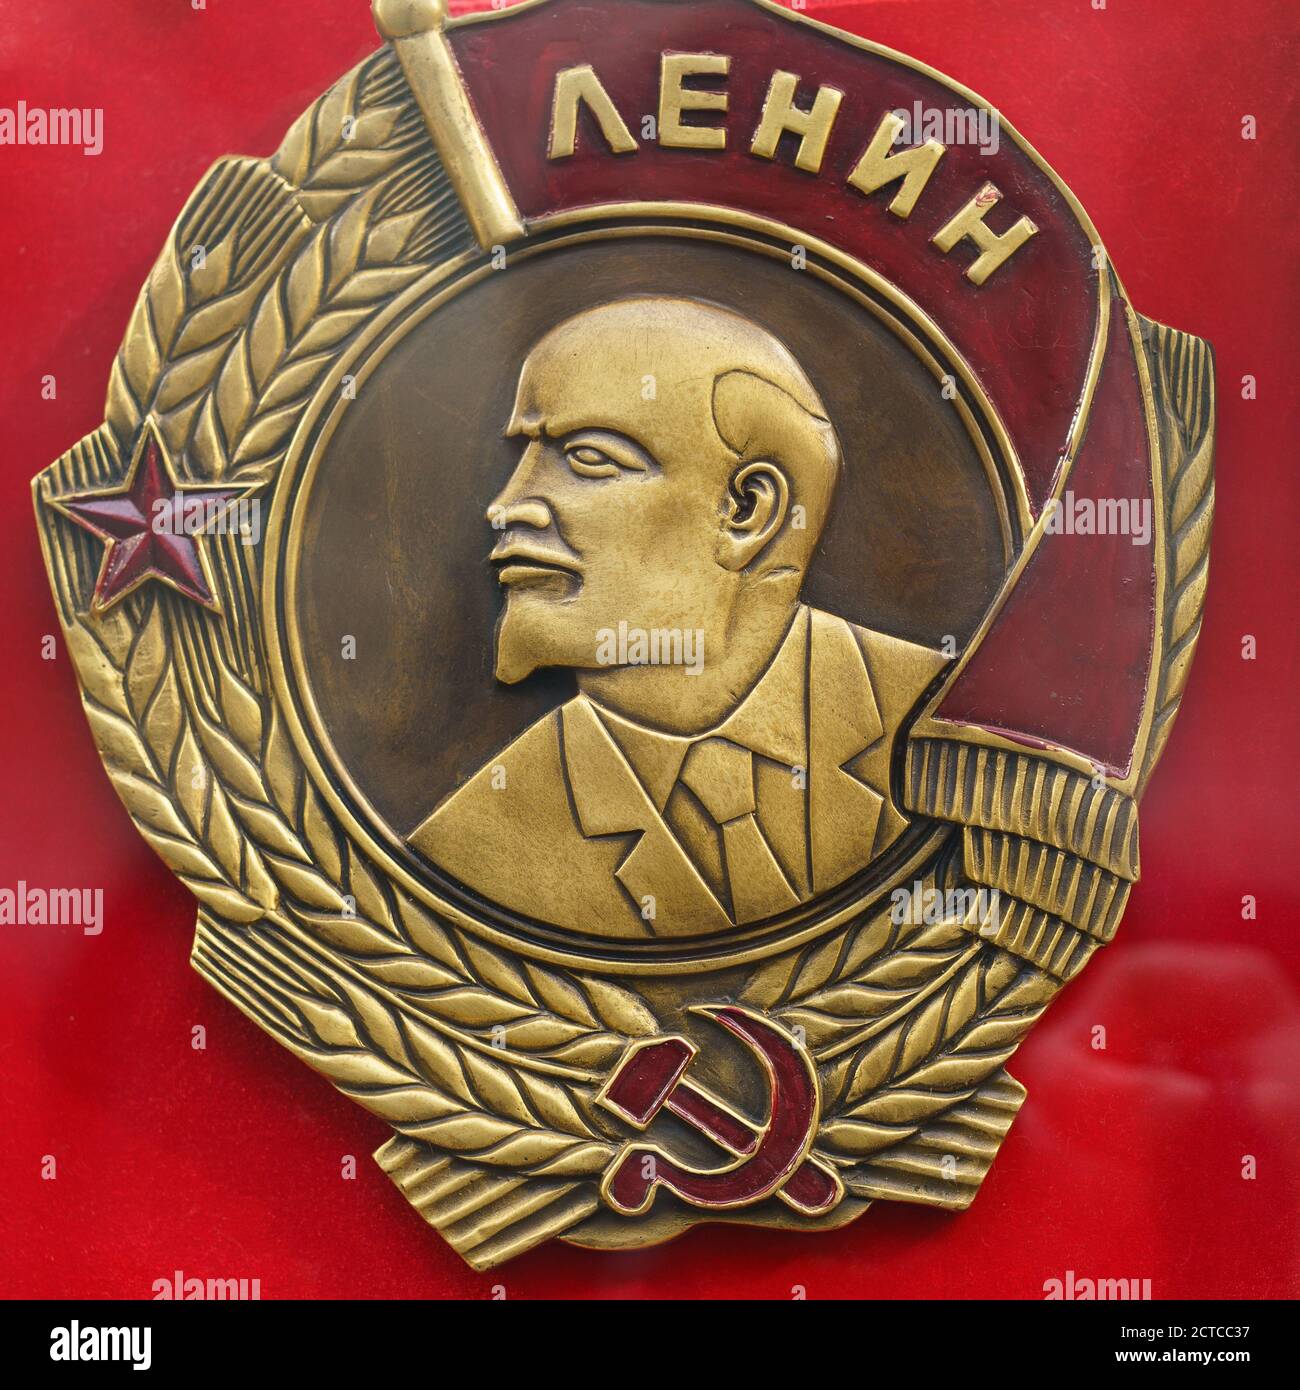 Moscow, Russia- September 10,2020: Order of Lenin named after leader of the Russian October Revolution, was established by Central Executive Committee Stock Photo